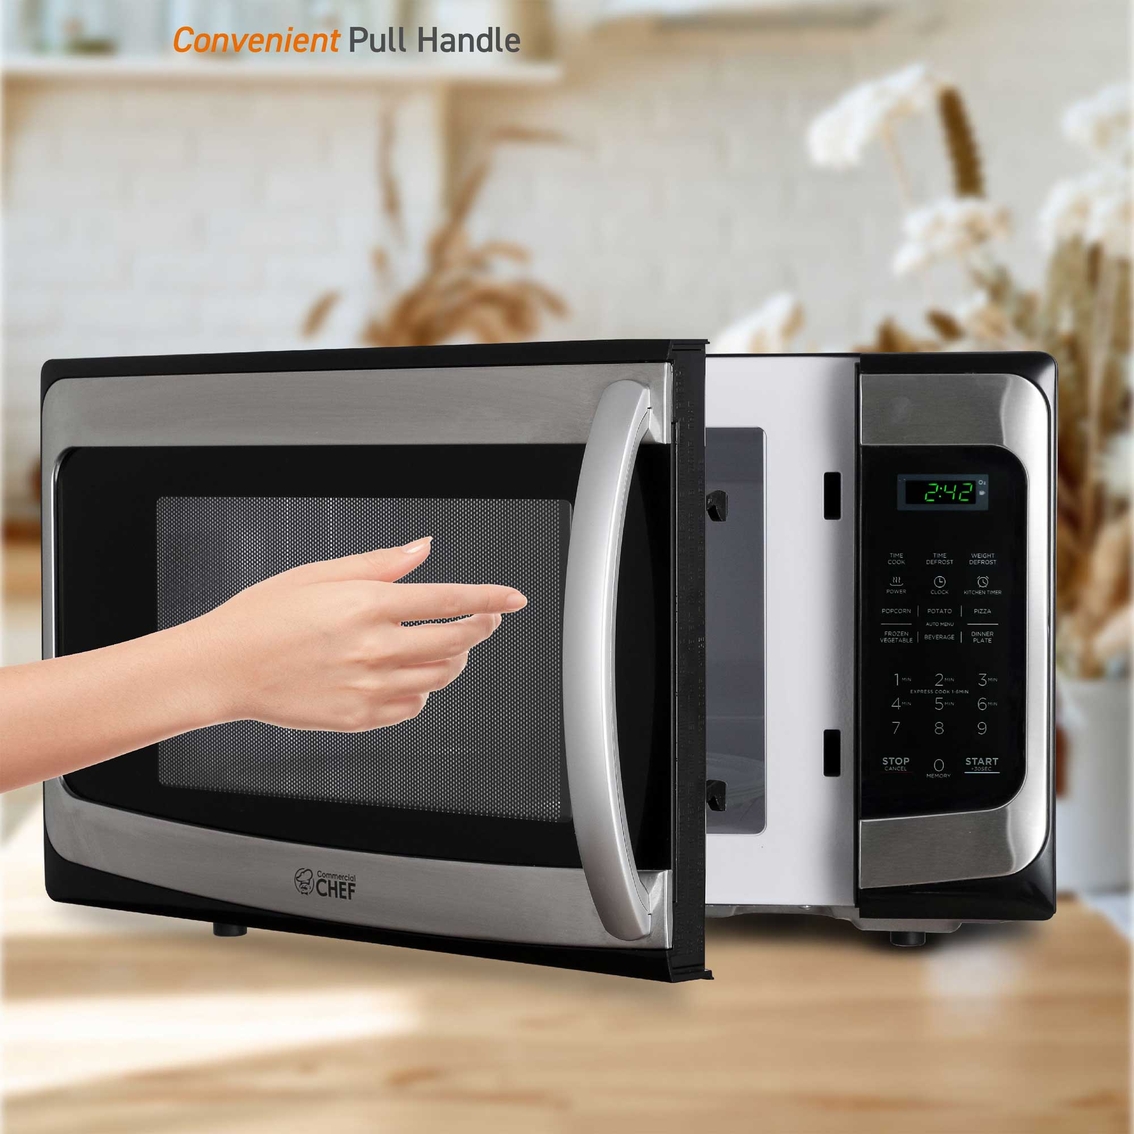 Commercial Chef 1.1 cu. ft. Countertop Microwave Oven - Image 5 of 7